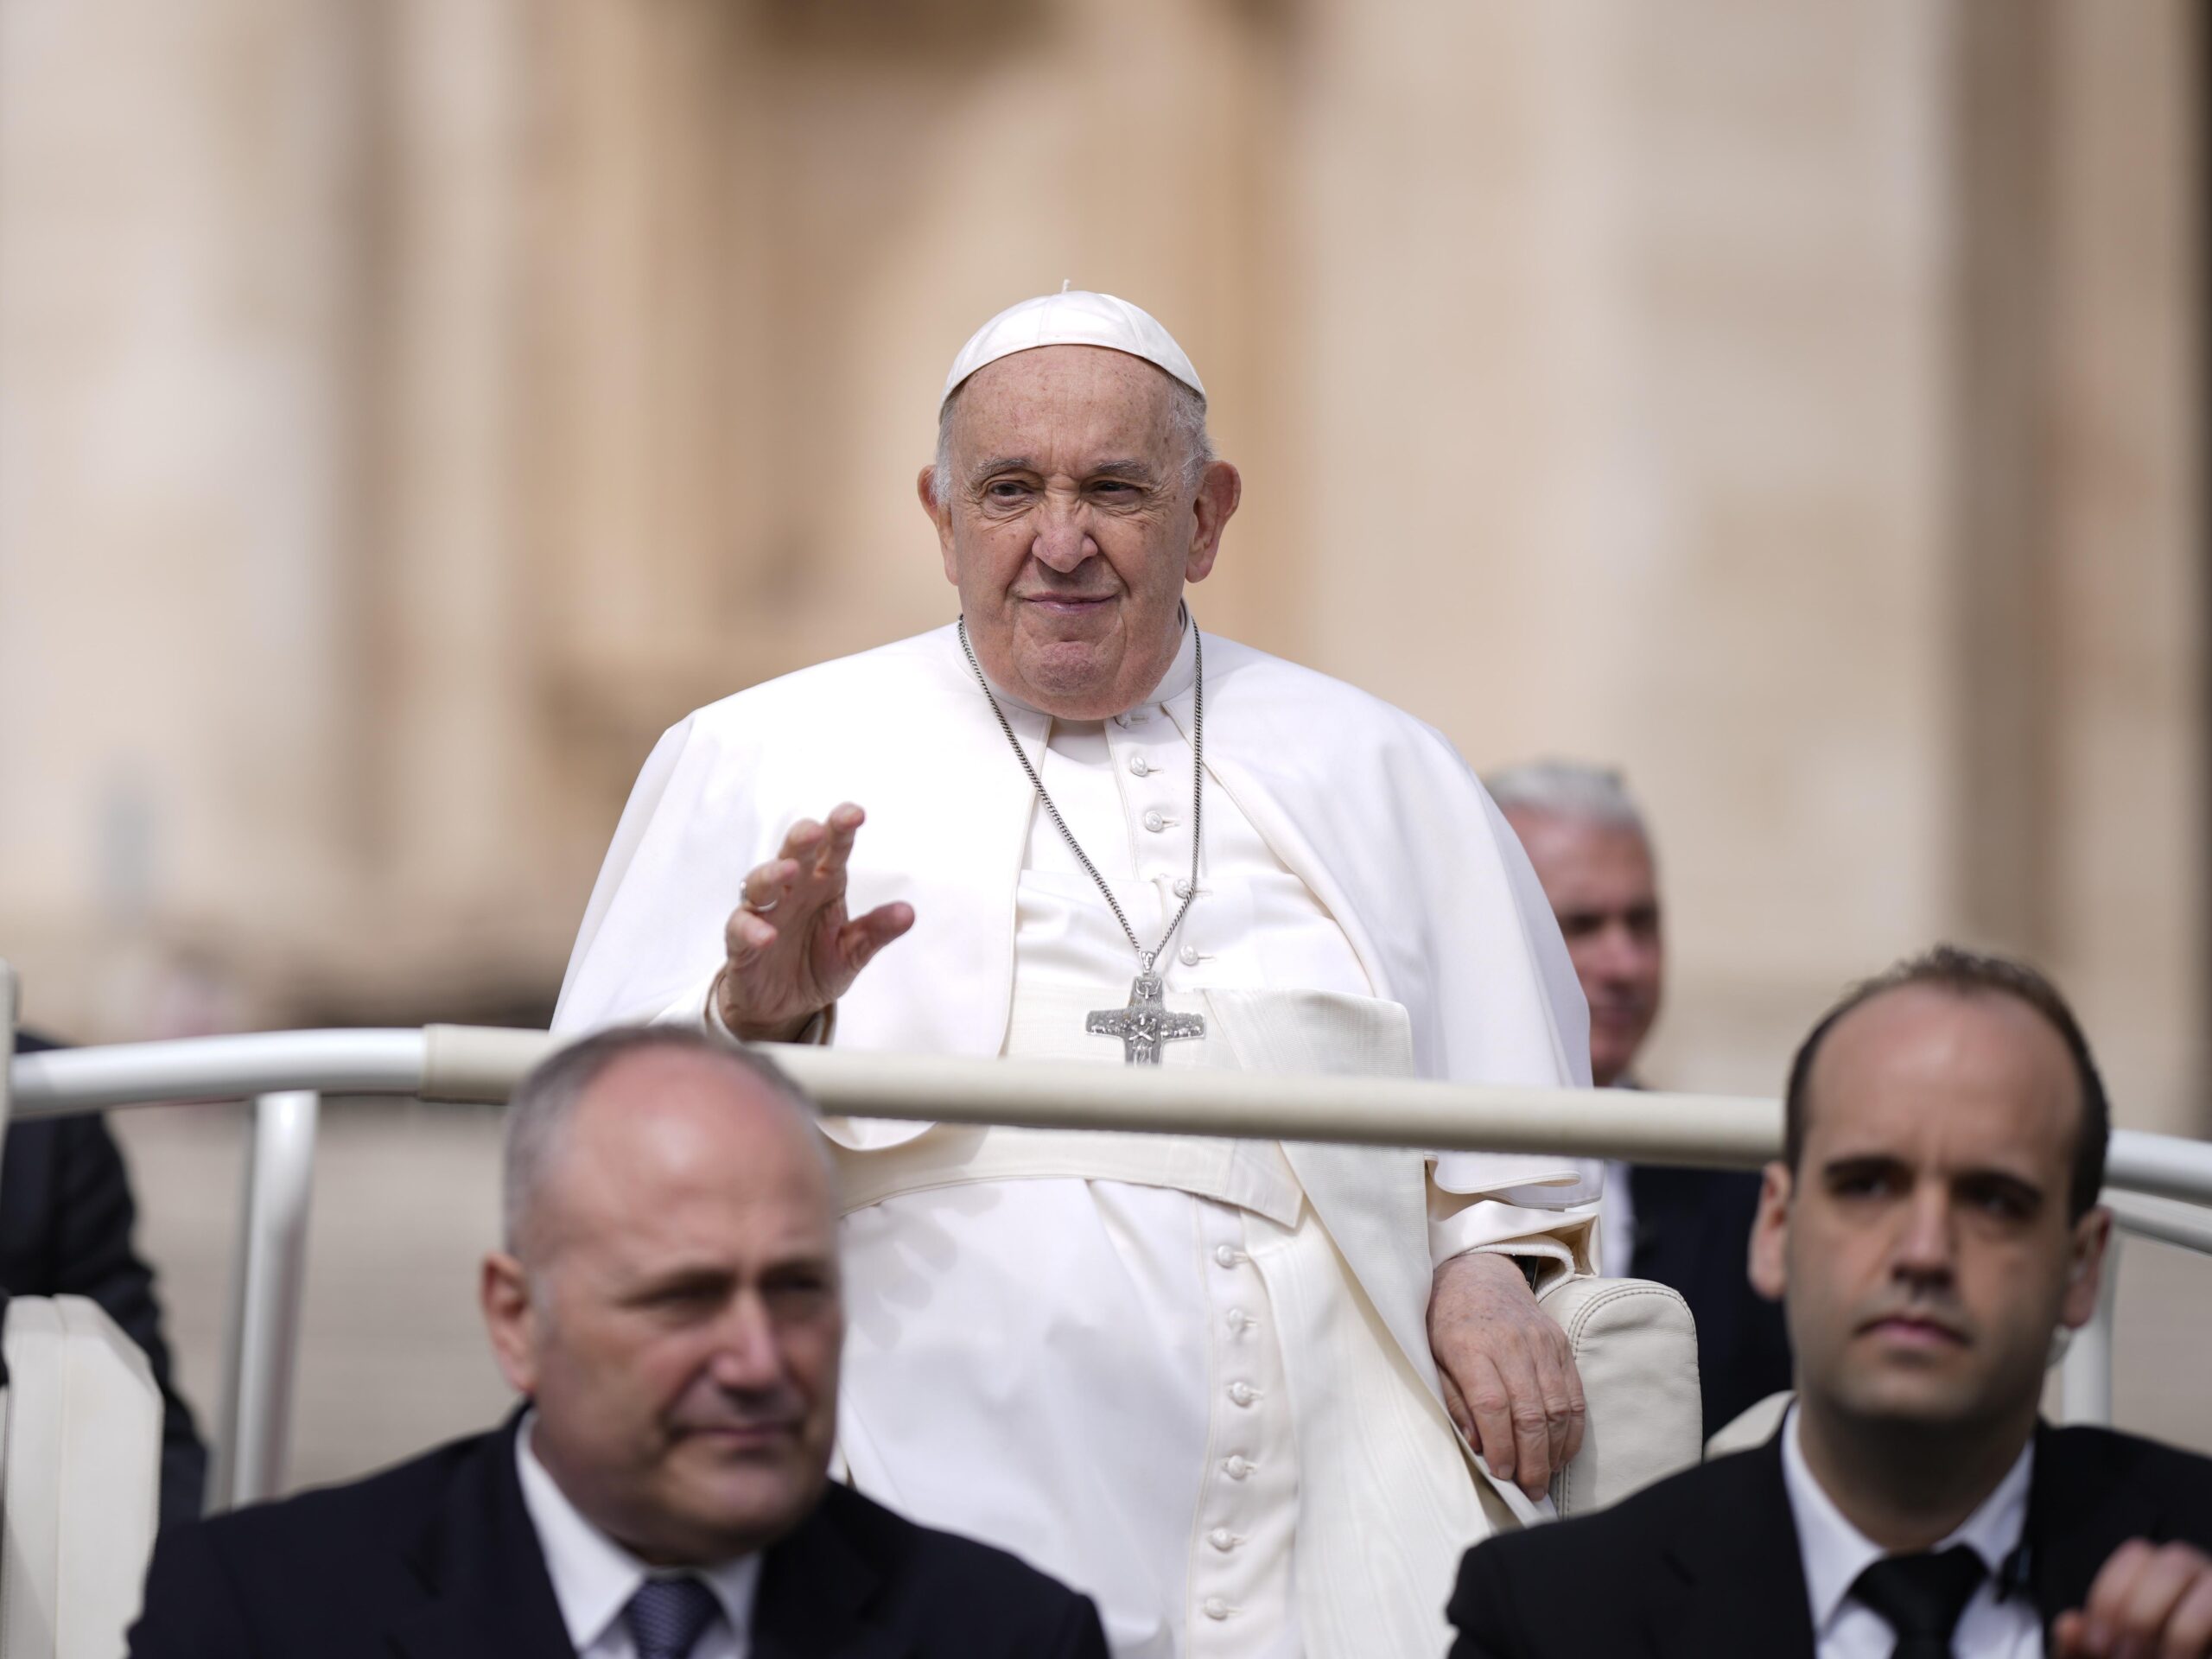 Pope Francis remains popular among U.S. Catholics, with 75% having favorable views of him, according to a Pew Research report. But many self-identified Catholics disagree with various teachings of their church.